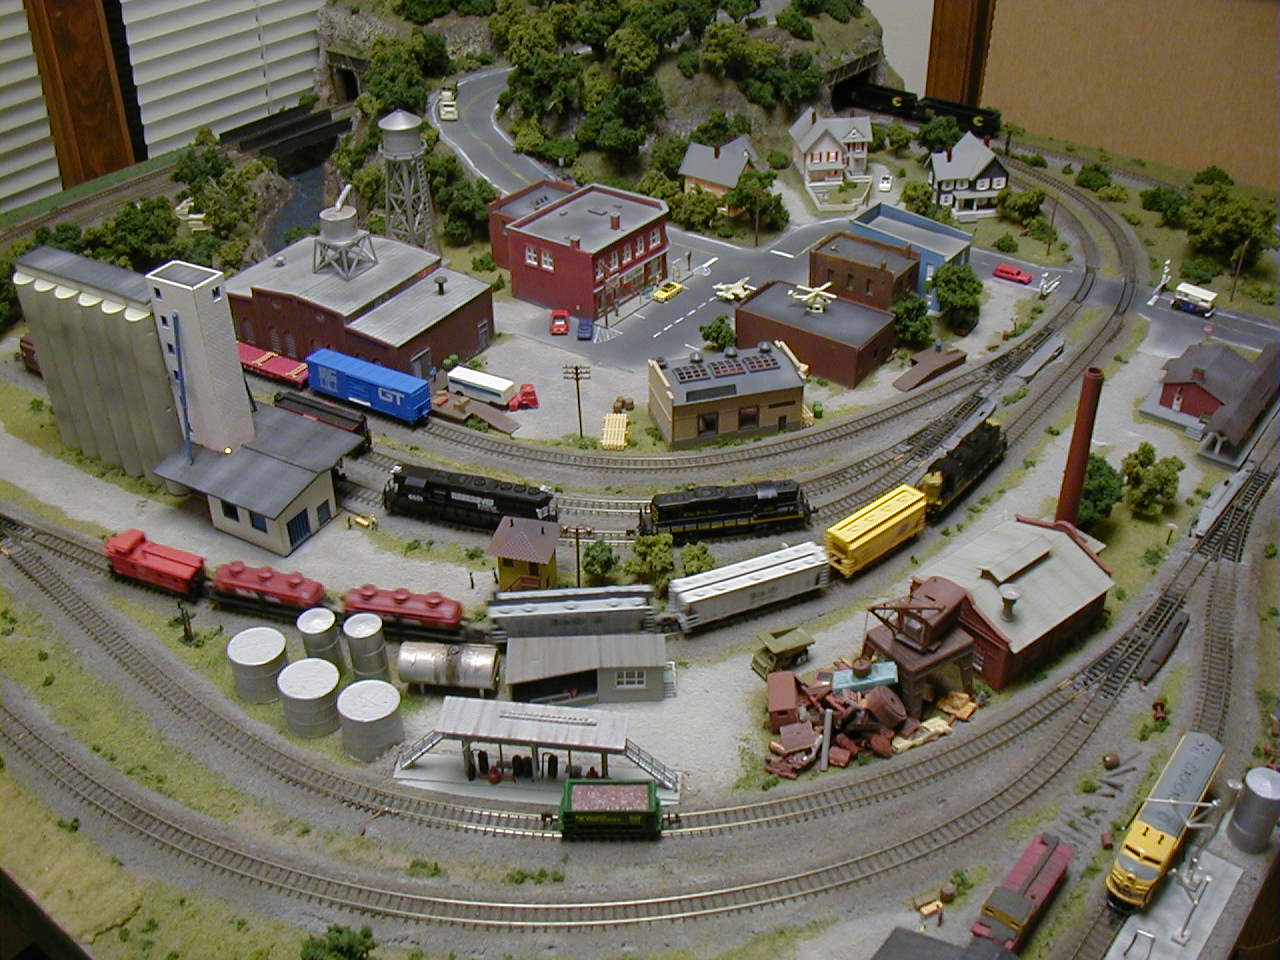  Incredible 4′ X 4′ N Scale Model Train Layout Photo Gallery